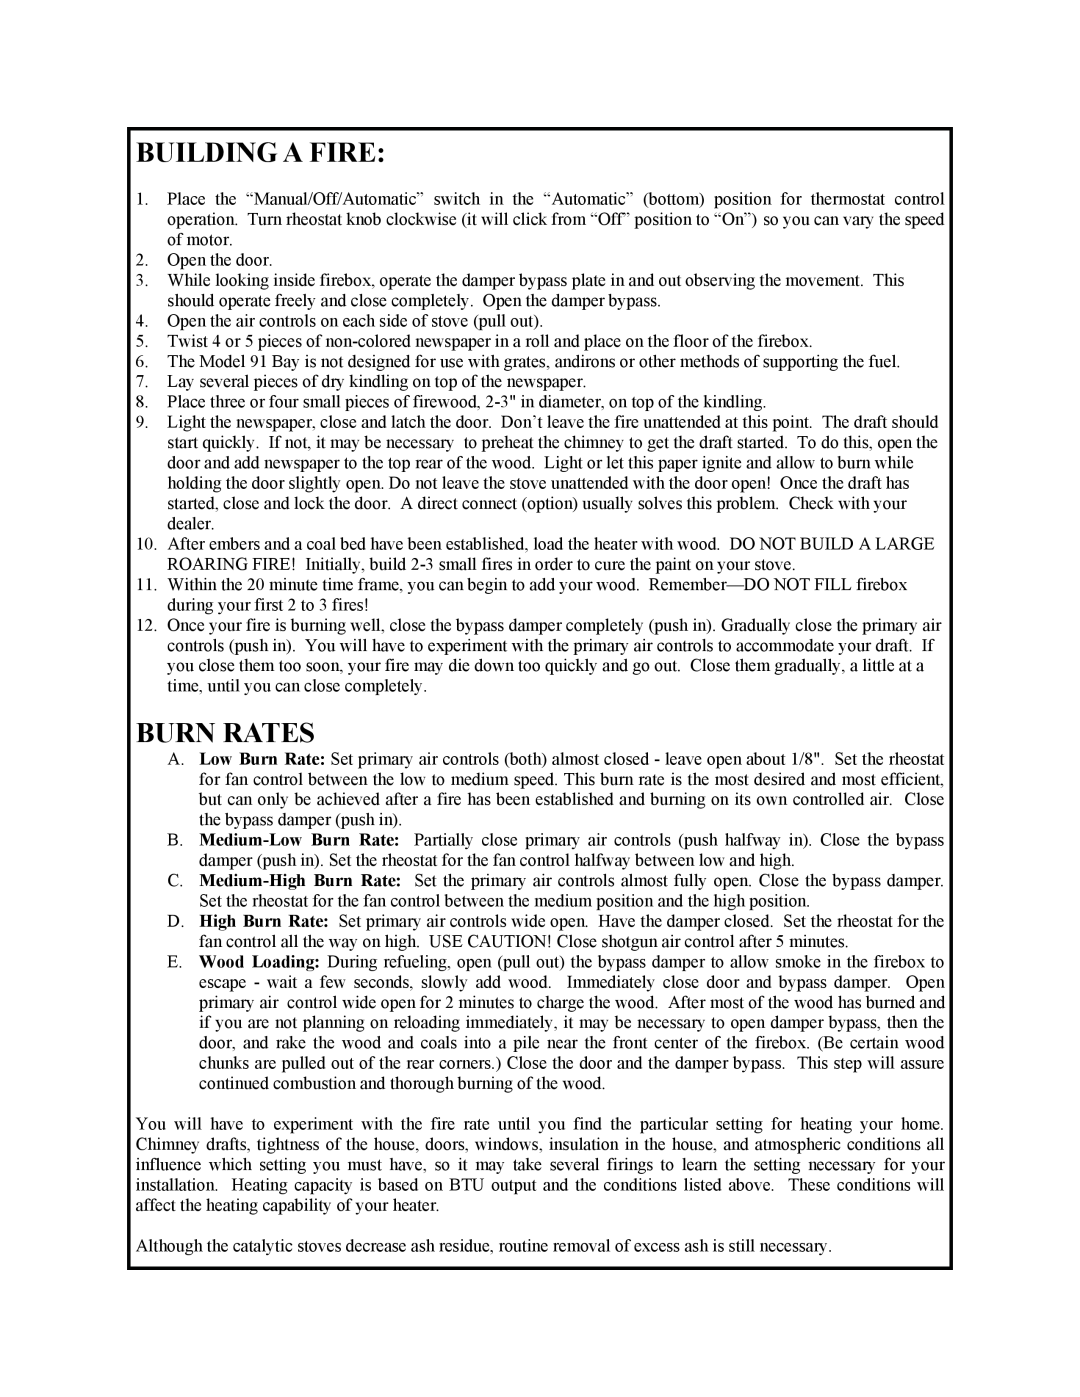 New Buck Corporation 91 manual Building A Fire, Burn Rates 